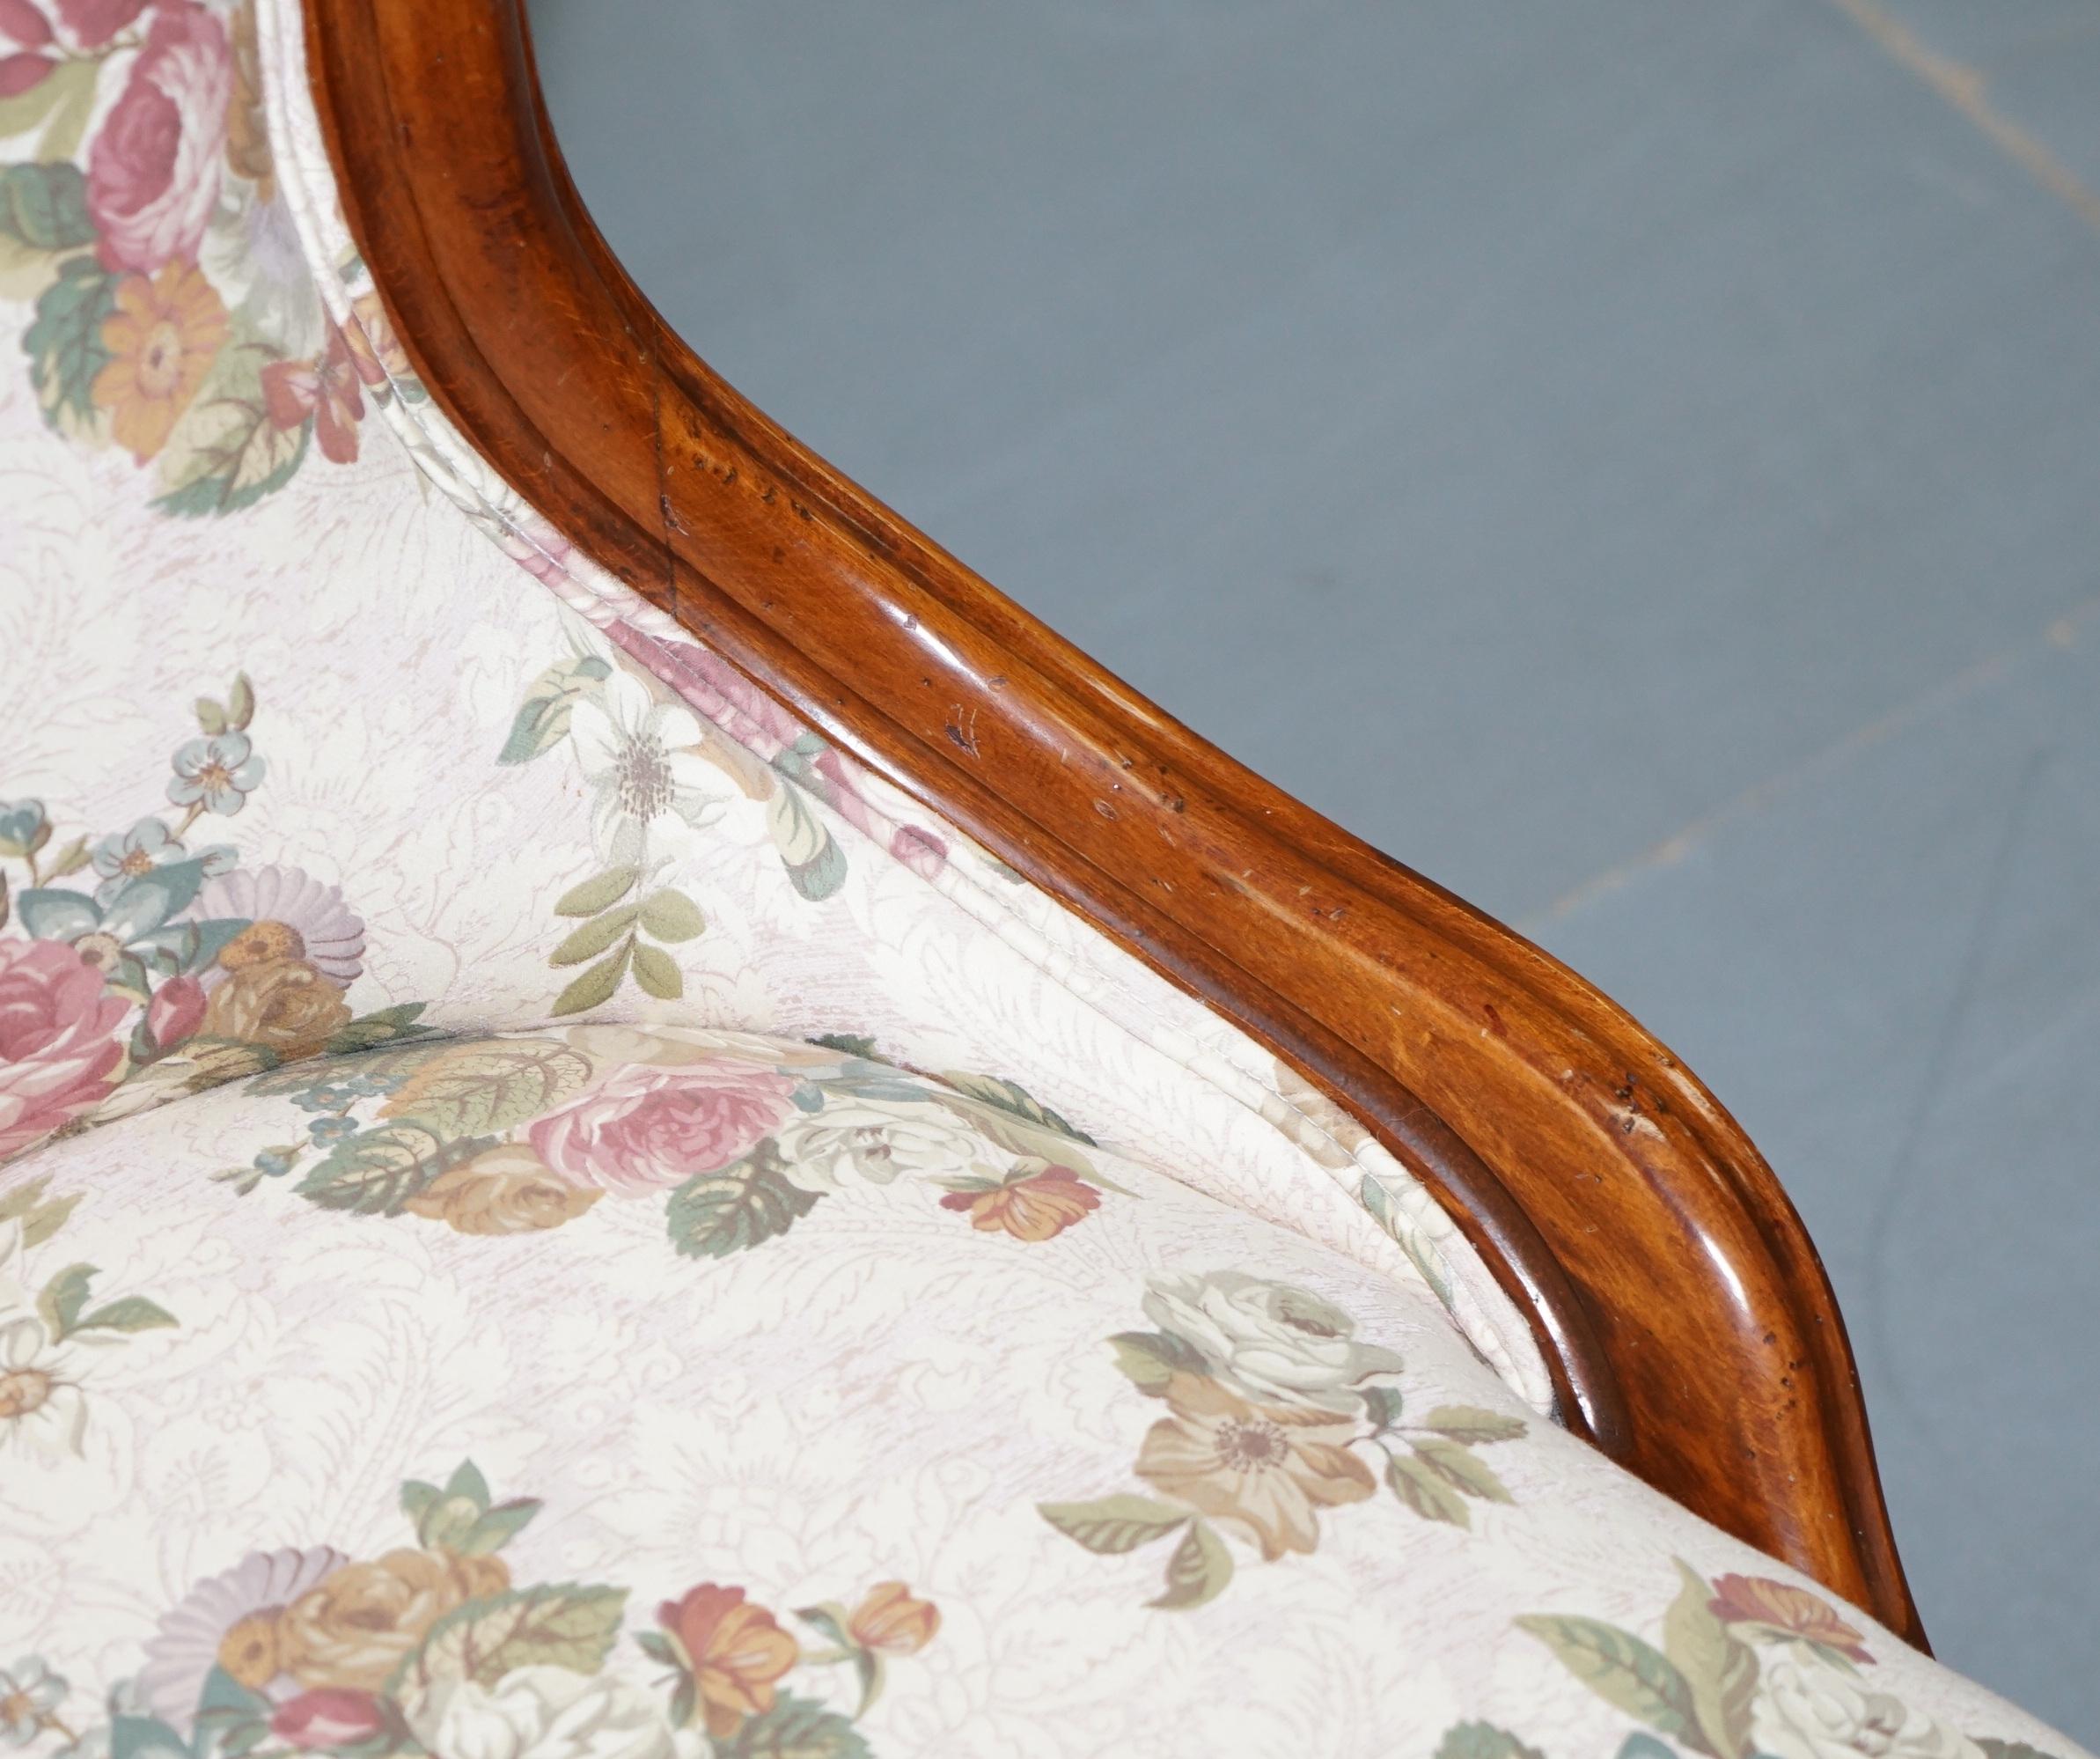 19th Century Lovely Victorian Walnut Framed with Floral Upholstery Nursing Chair or Armchair